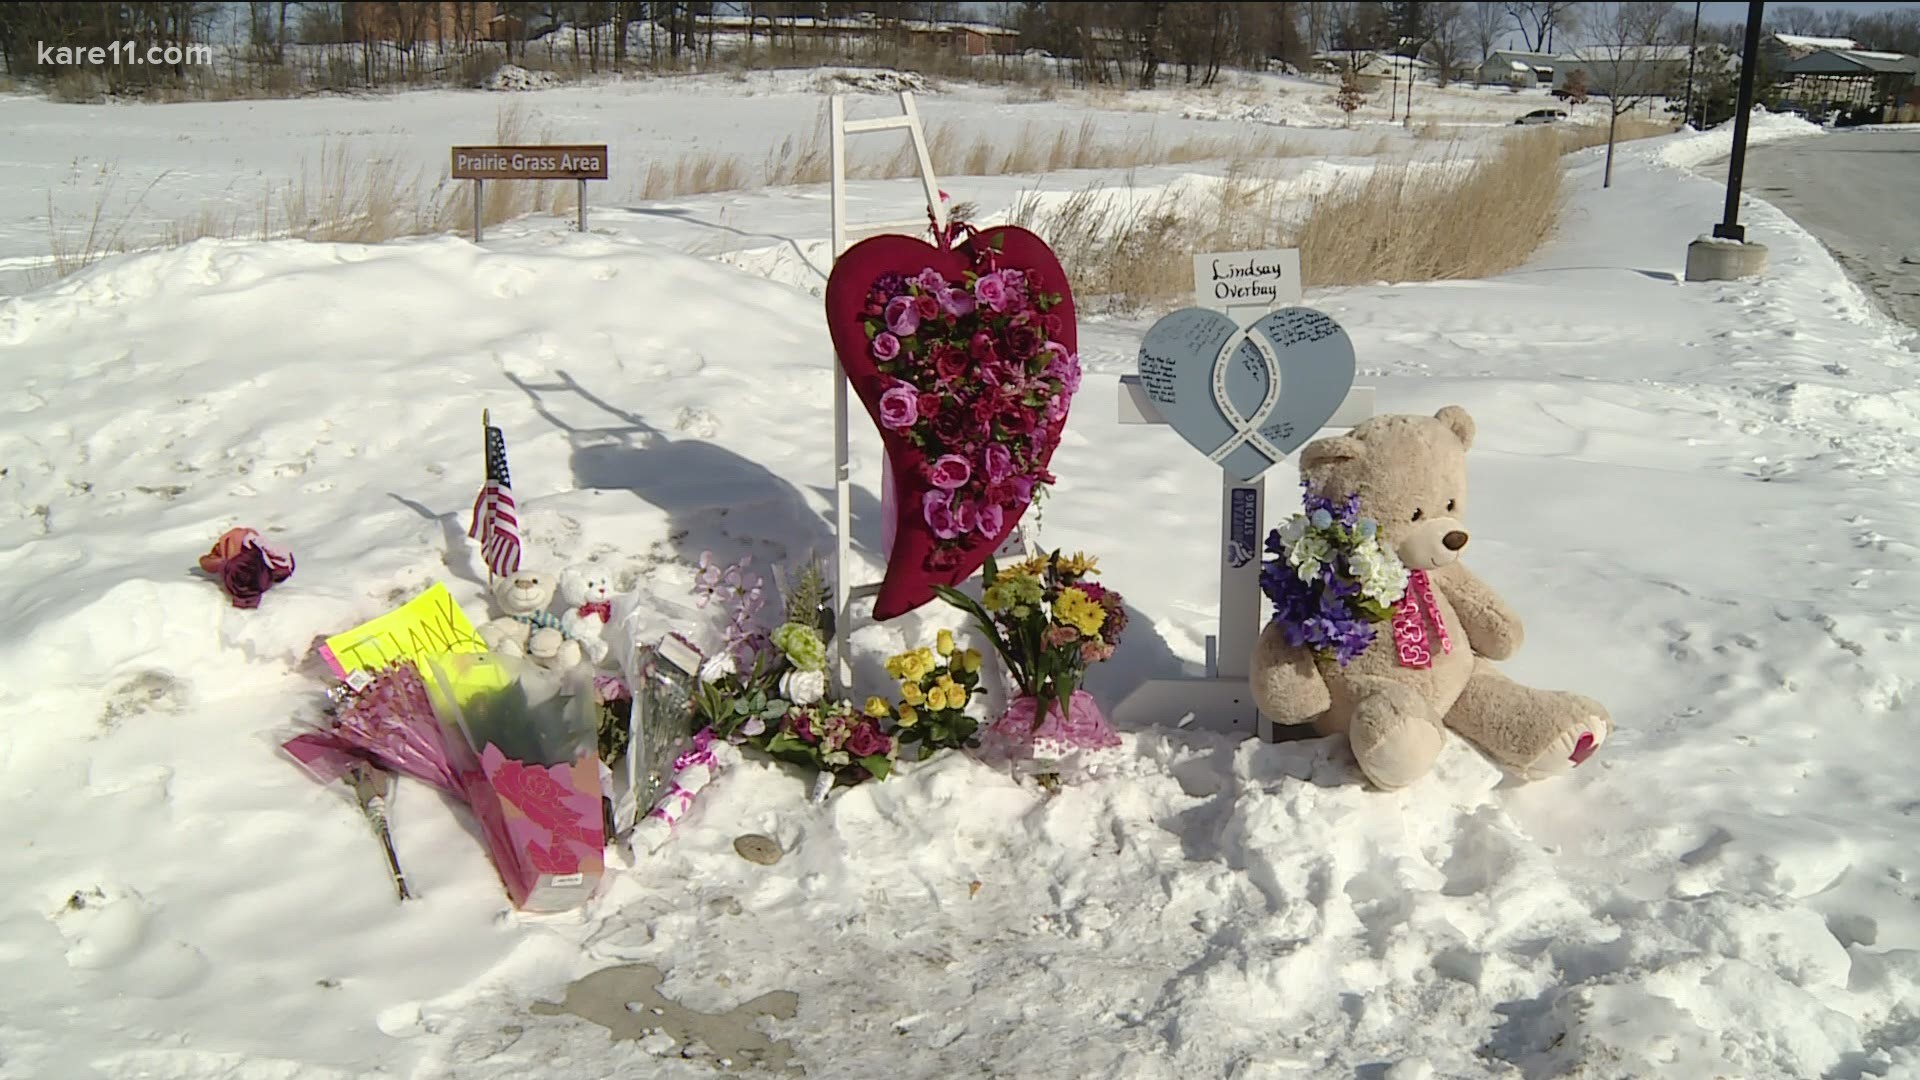 Exactly one week after the shooting devastated the Buffalo community, Minnesotans across the state held a moment of silence to honor the victim’s.